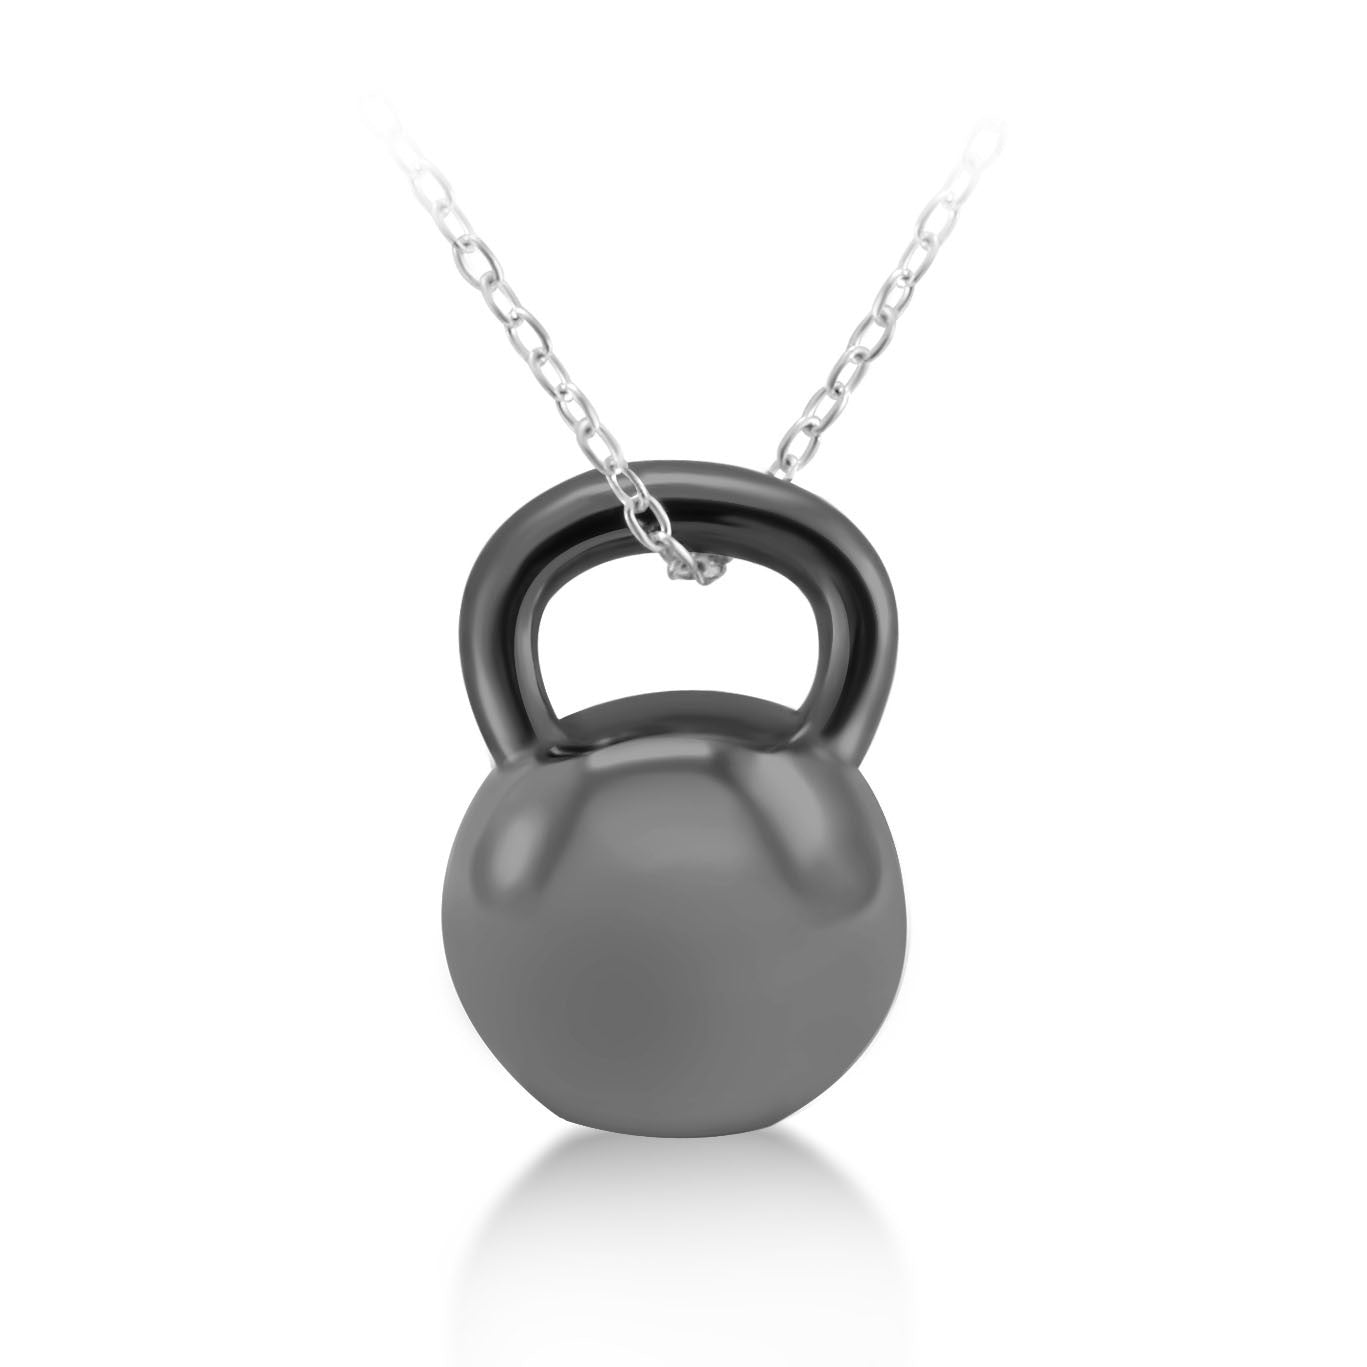 Grand Kettlebell Necklace